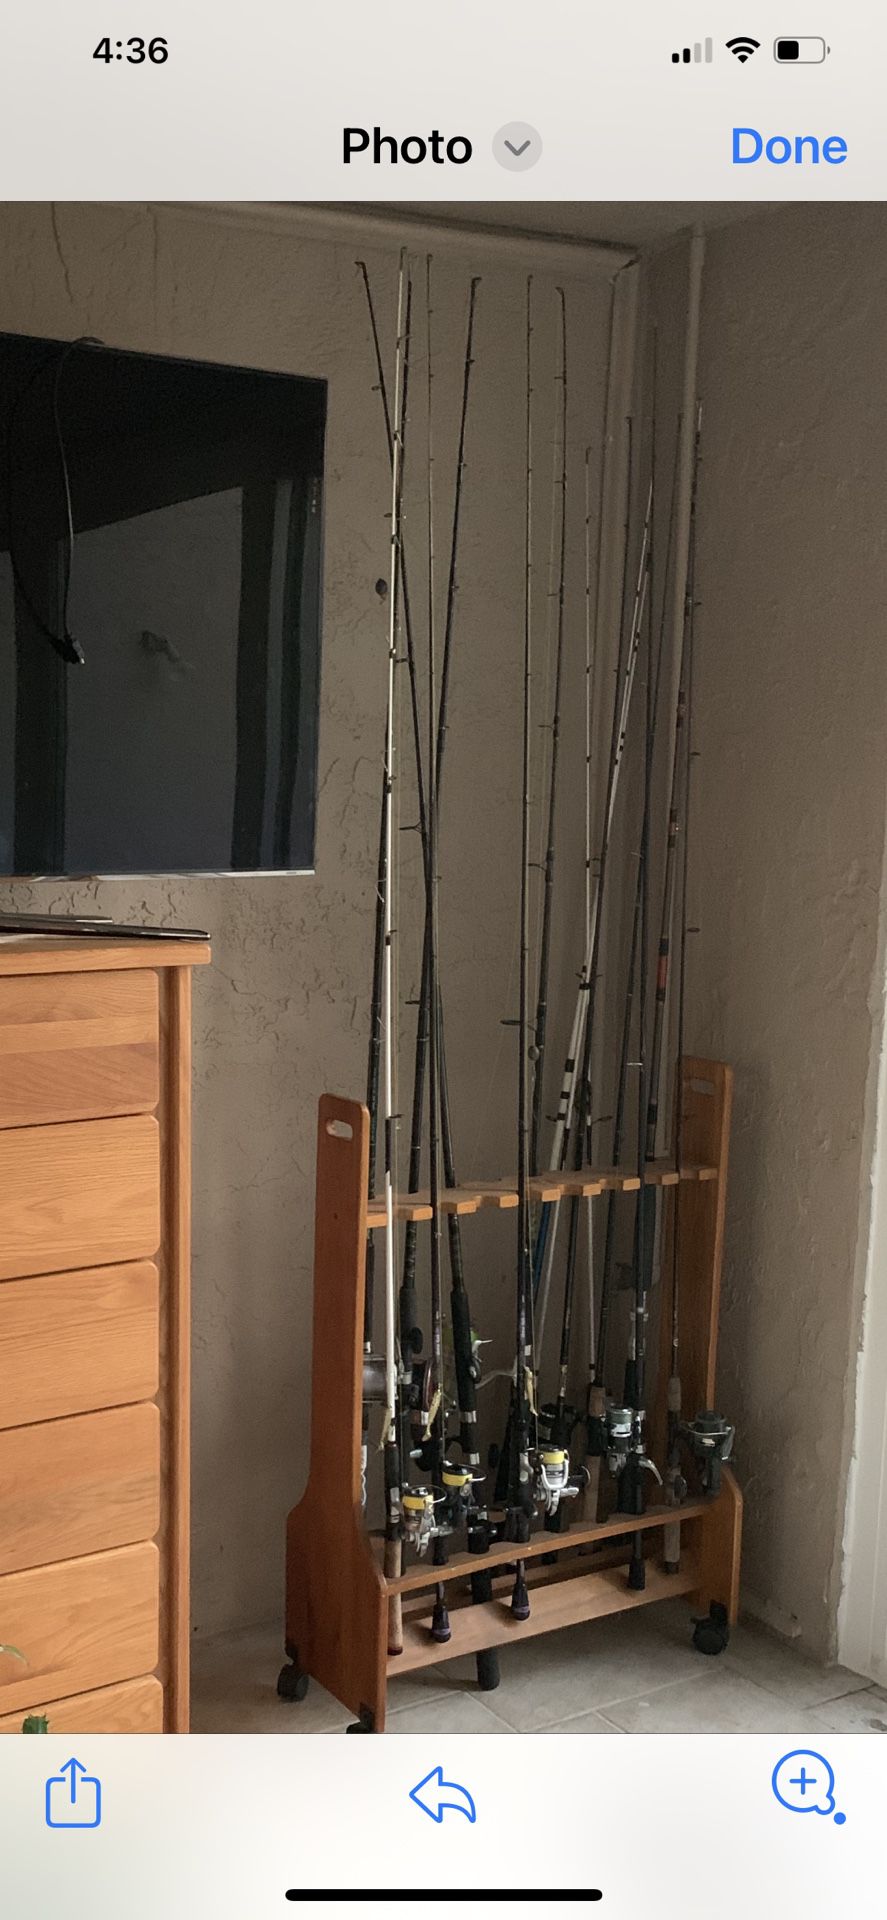 Fishing Rod Holder Rack Exc Condition 